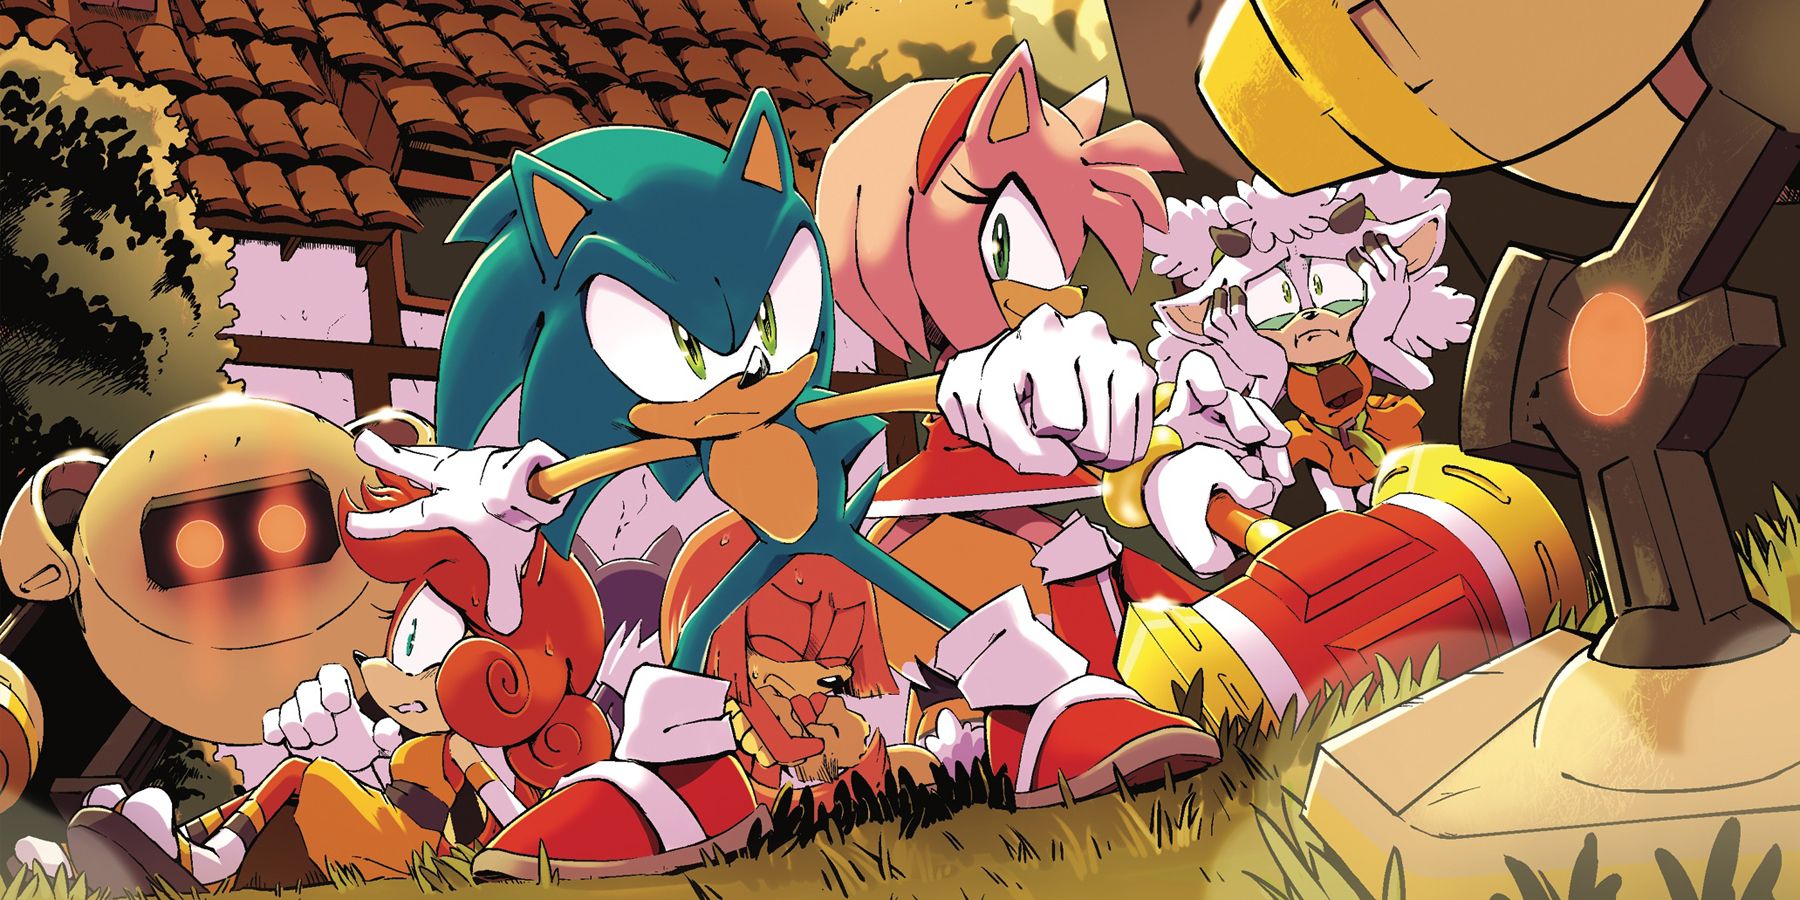 Sonic The Hedgehog 2 Covers The Idw Era Begins